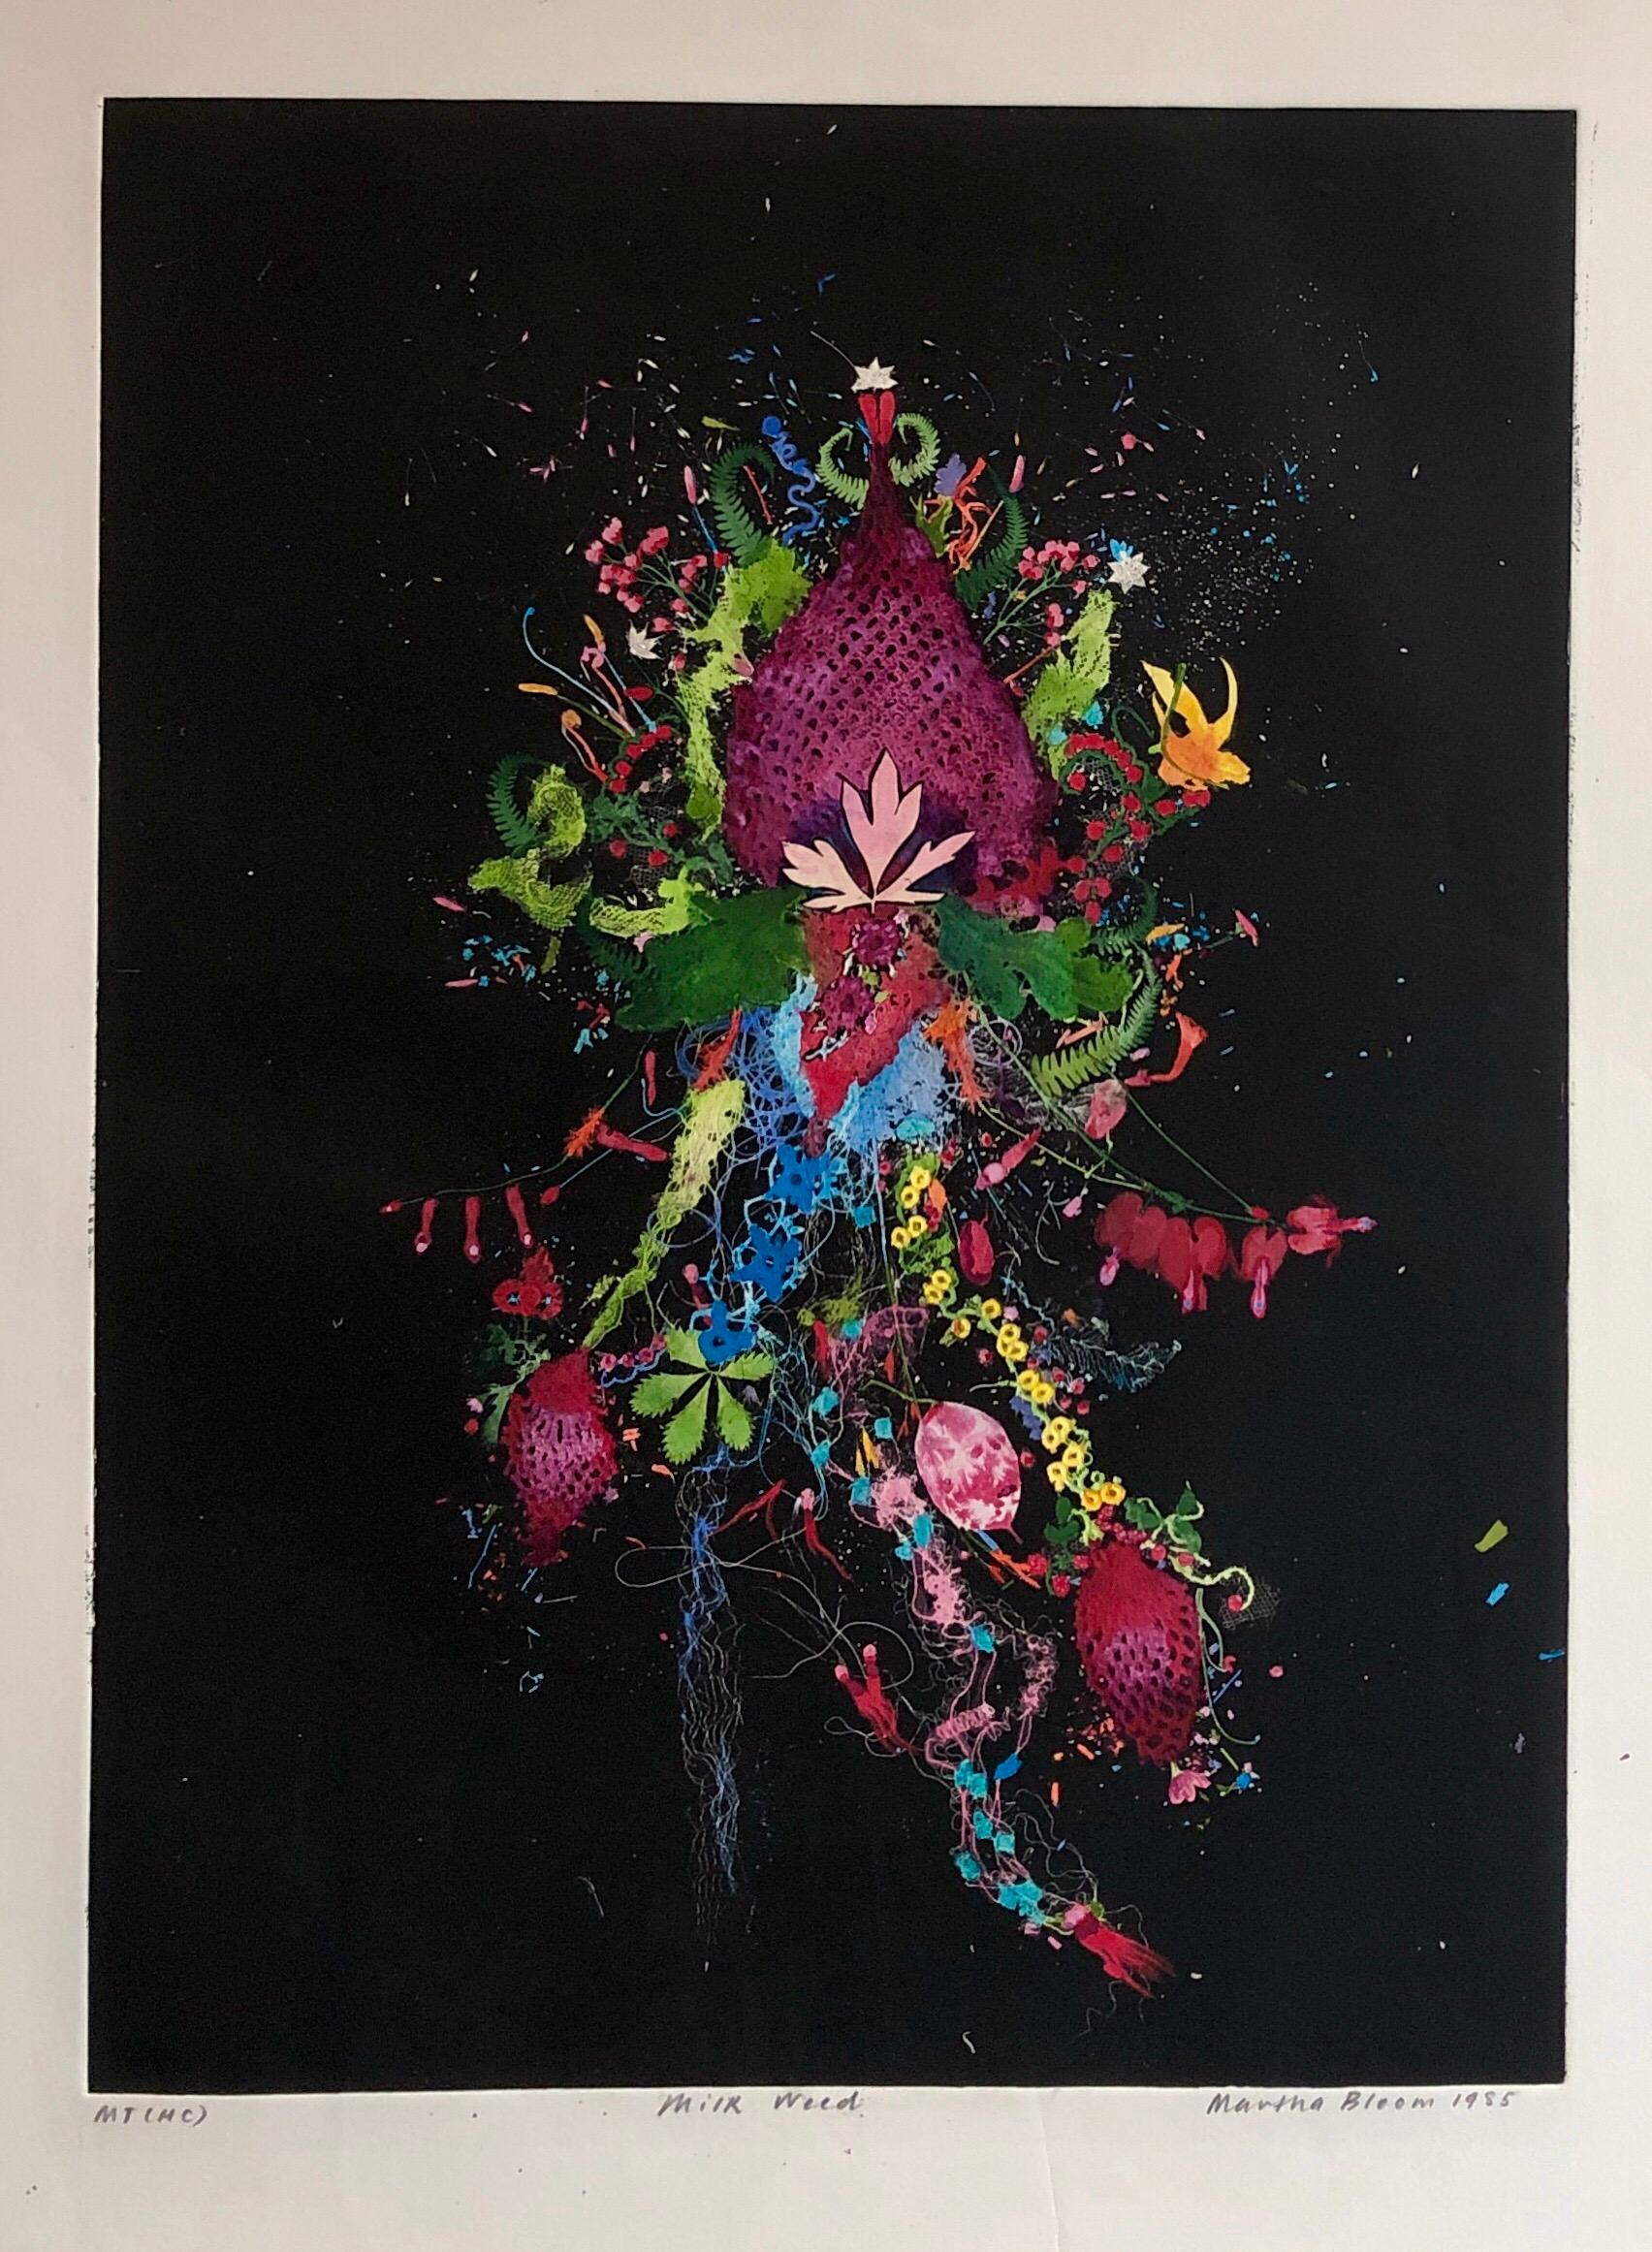 Mixed Media collage Assemblage painting and or monoprint or monotype on BFK Rives French art paper. It depicts a wild profusion of bold colored flowers
Education
1976 Stanley Hayter Atelier 17 Workshop, Paris, France
1975 Hugh Stoneman Workshop,